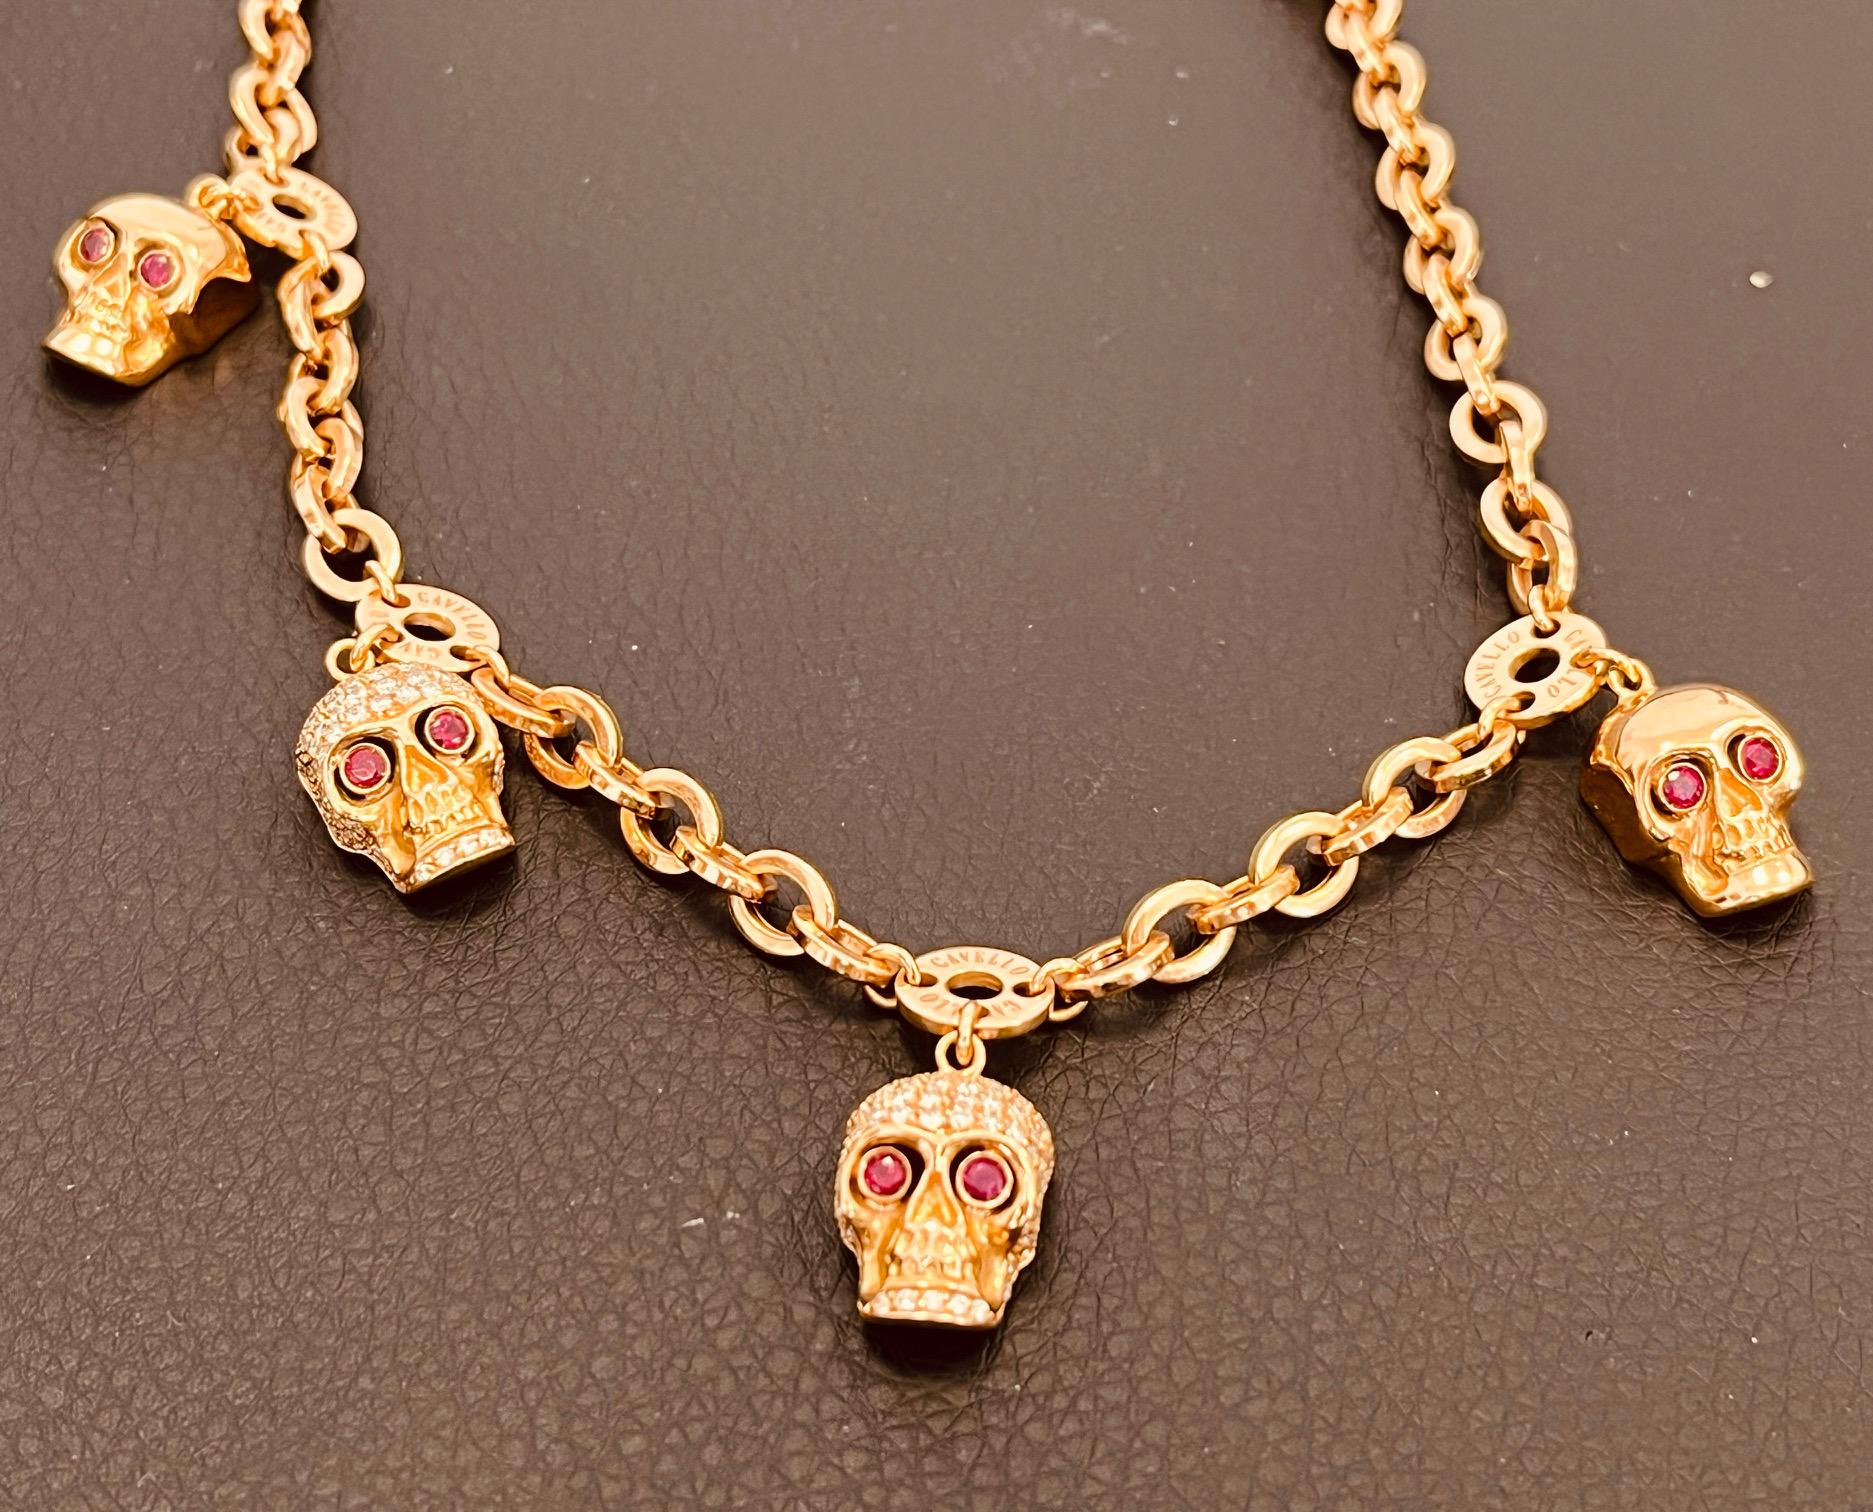 Gavello 18 Carat Gold, 2.2 Carat Diamonds and 0.5 Carat Ruby Eye Skull Necklace For Sale 6